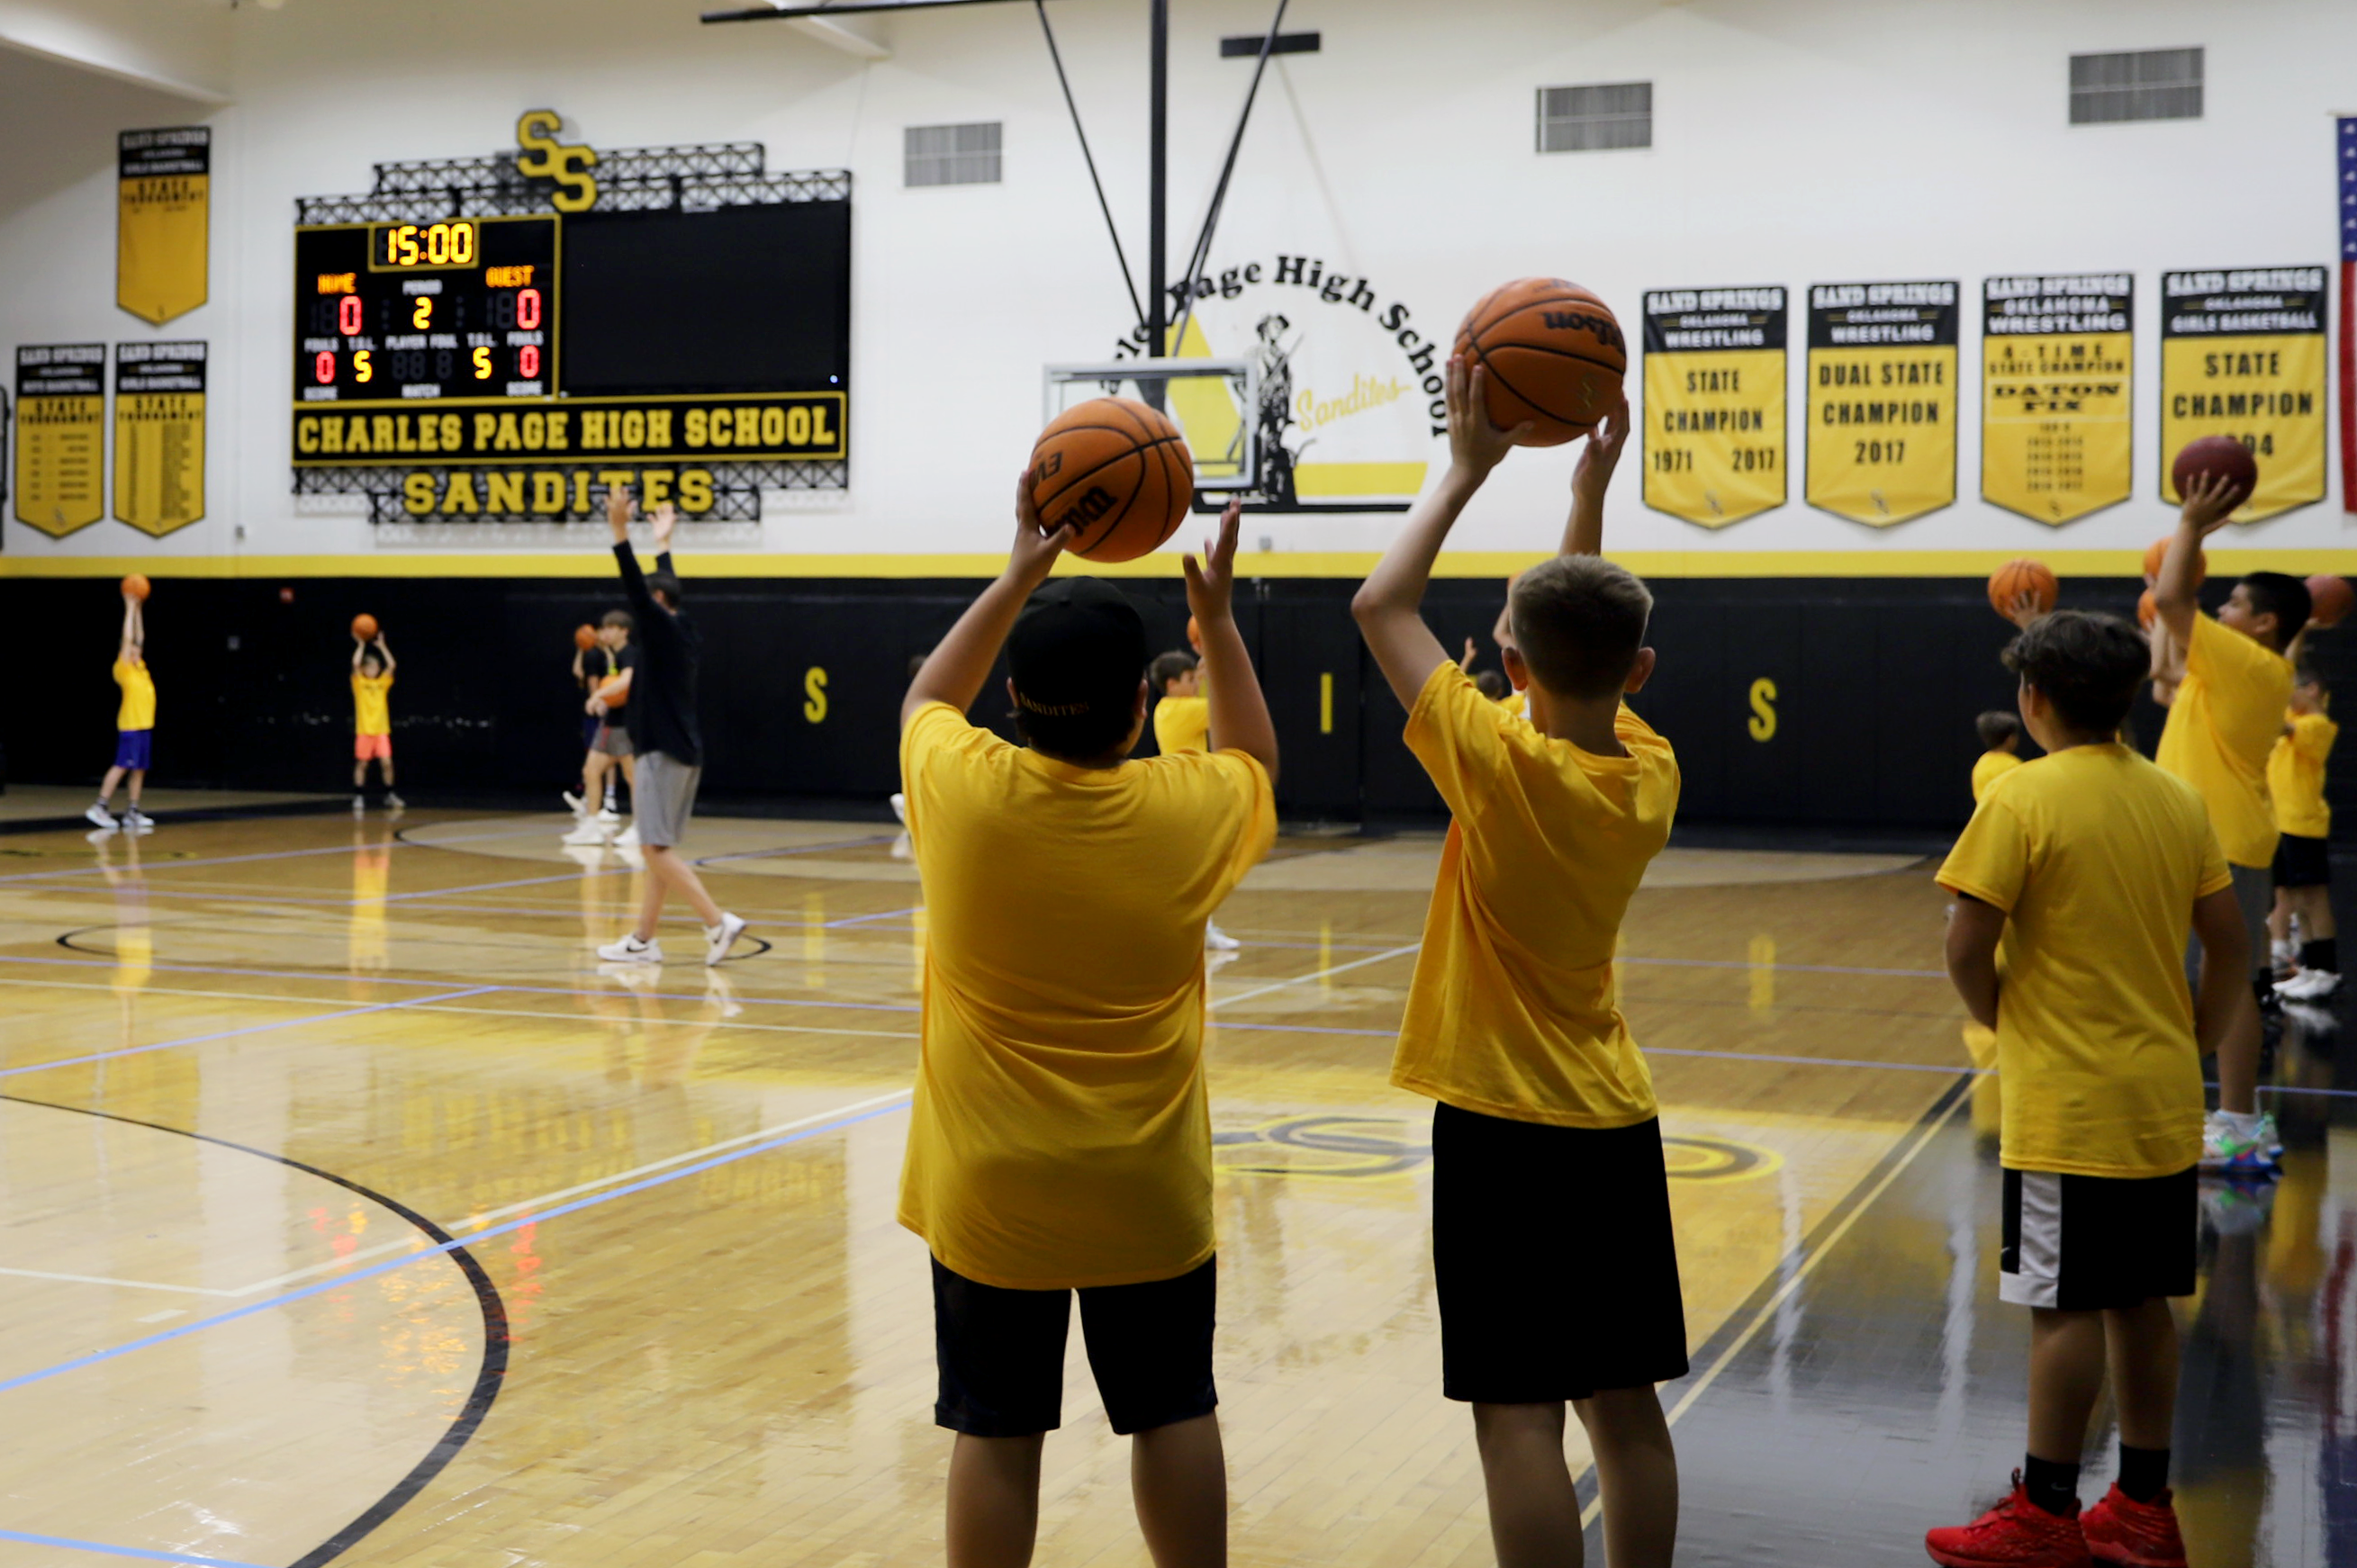 Elementary students in basketball gymnasium hold basketballs in the air at basketball camp